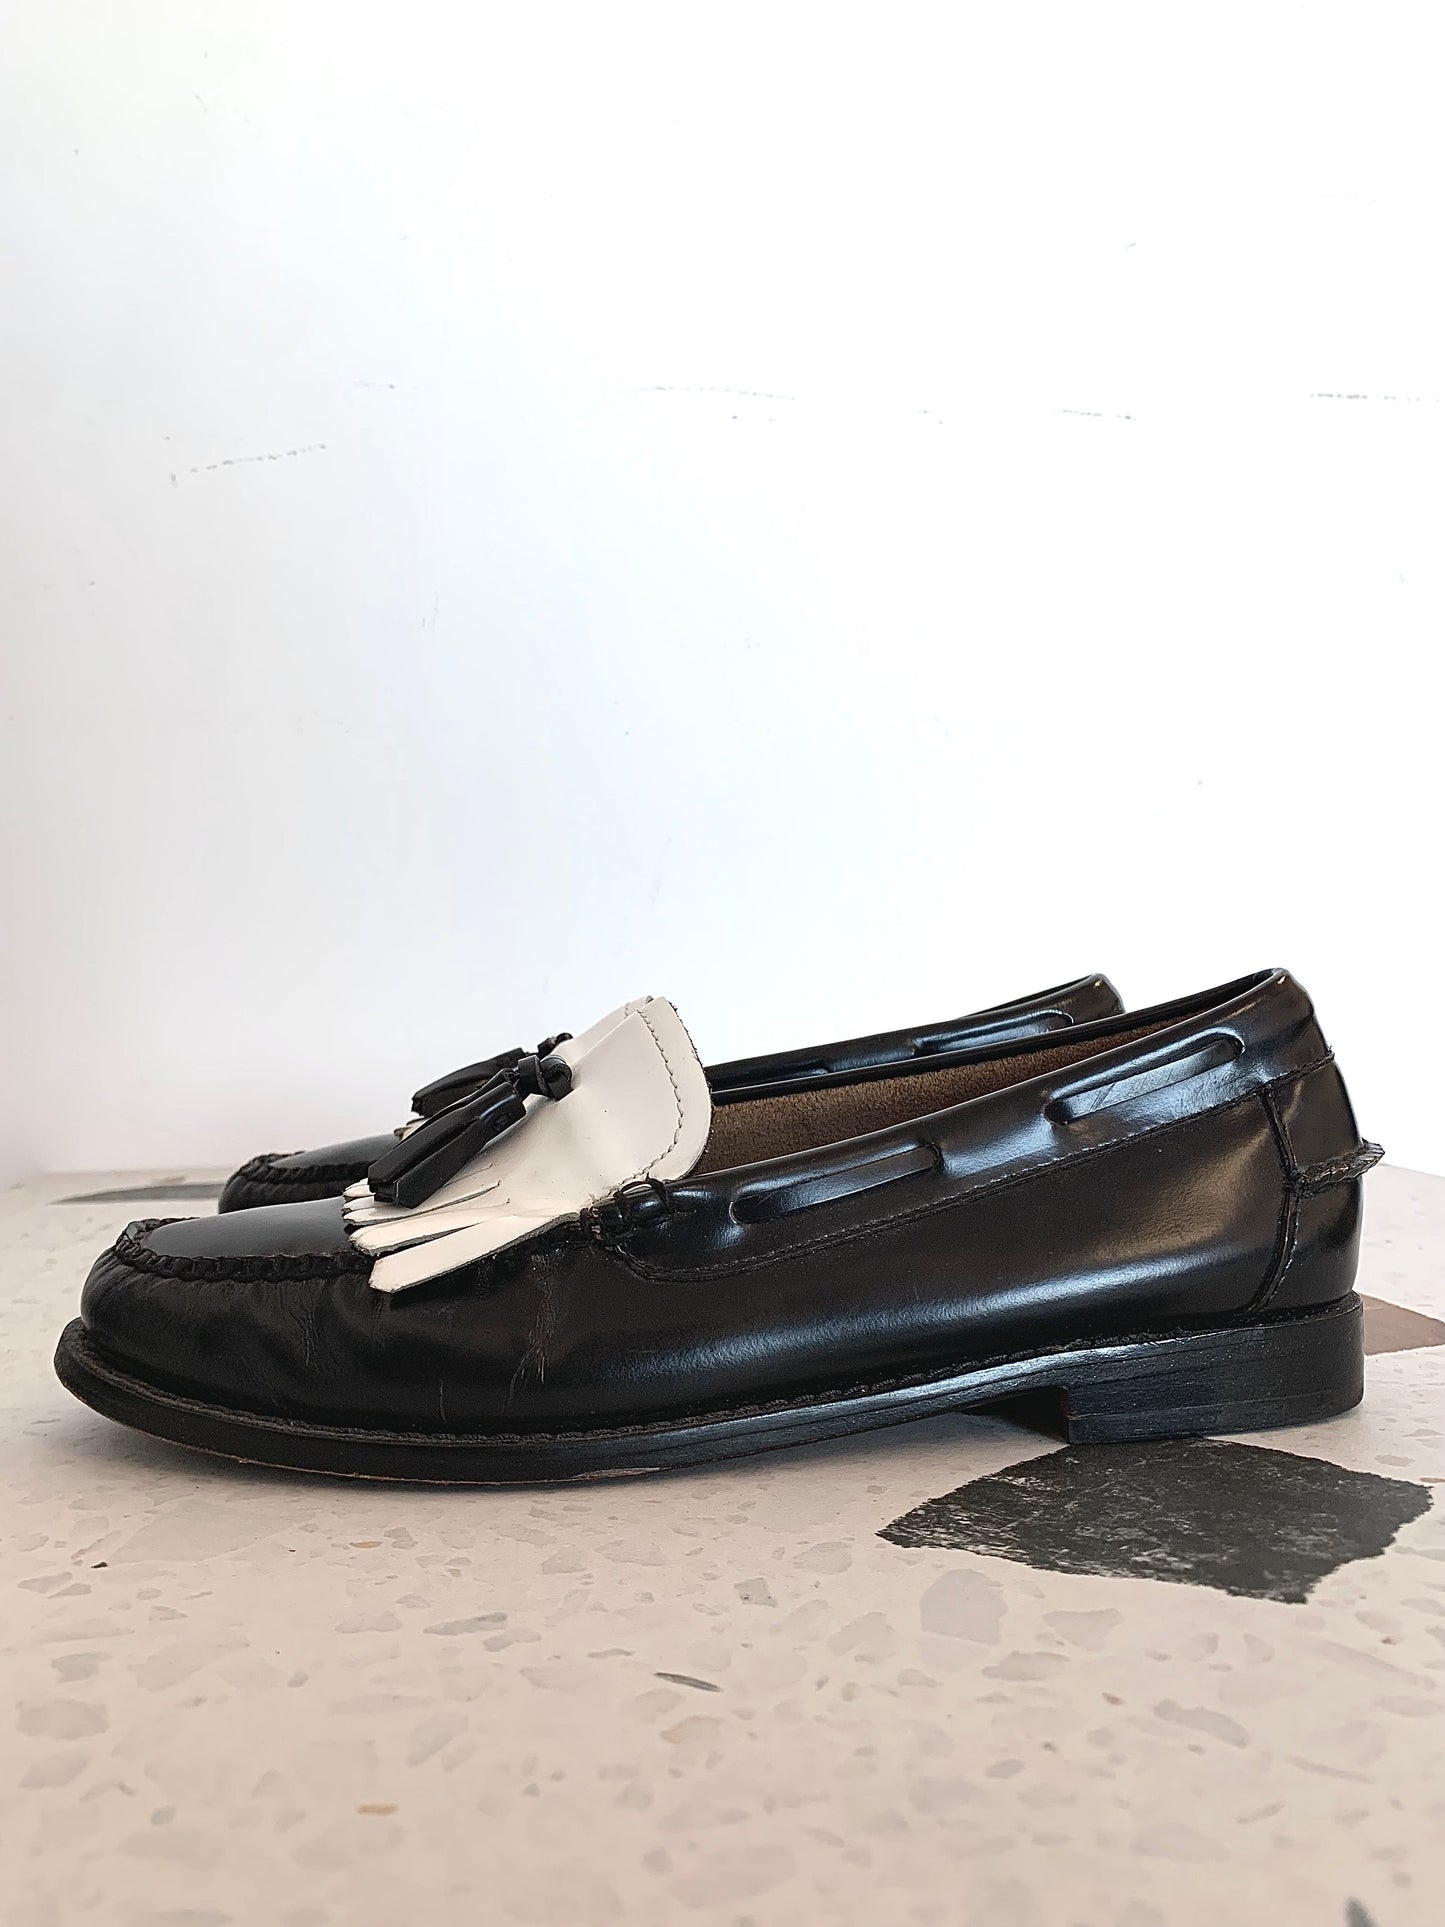 Loafers Weejuns noir & blanc